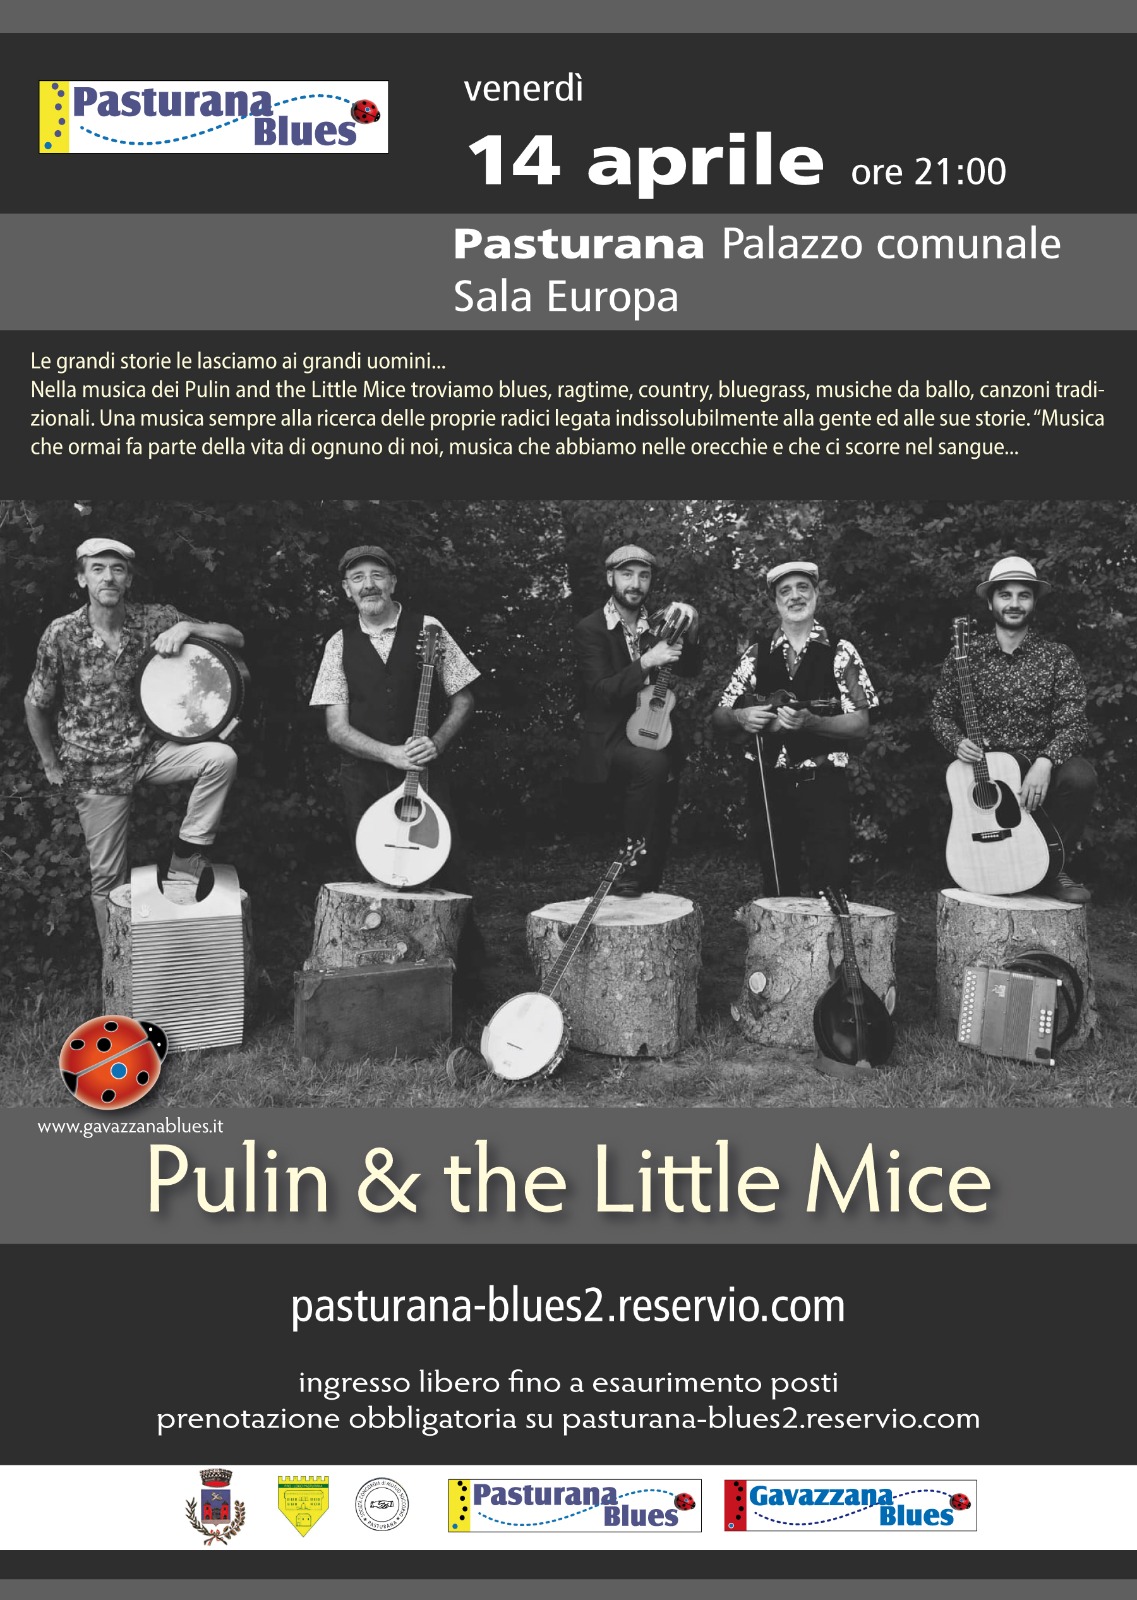 Pulin and then little mice